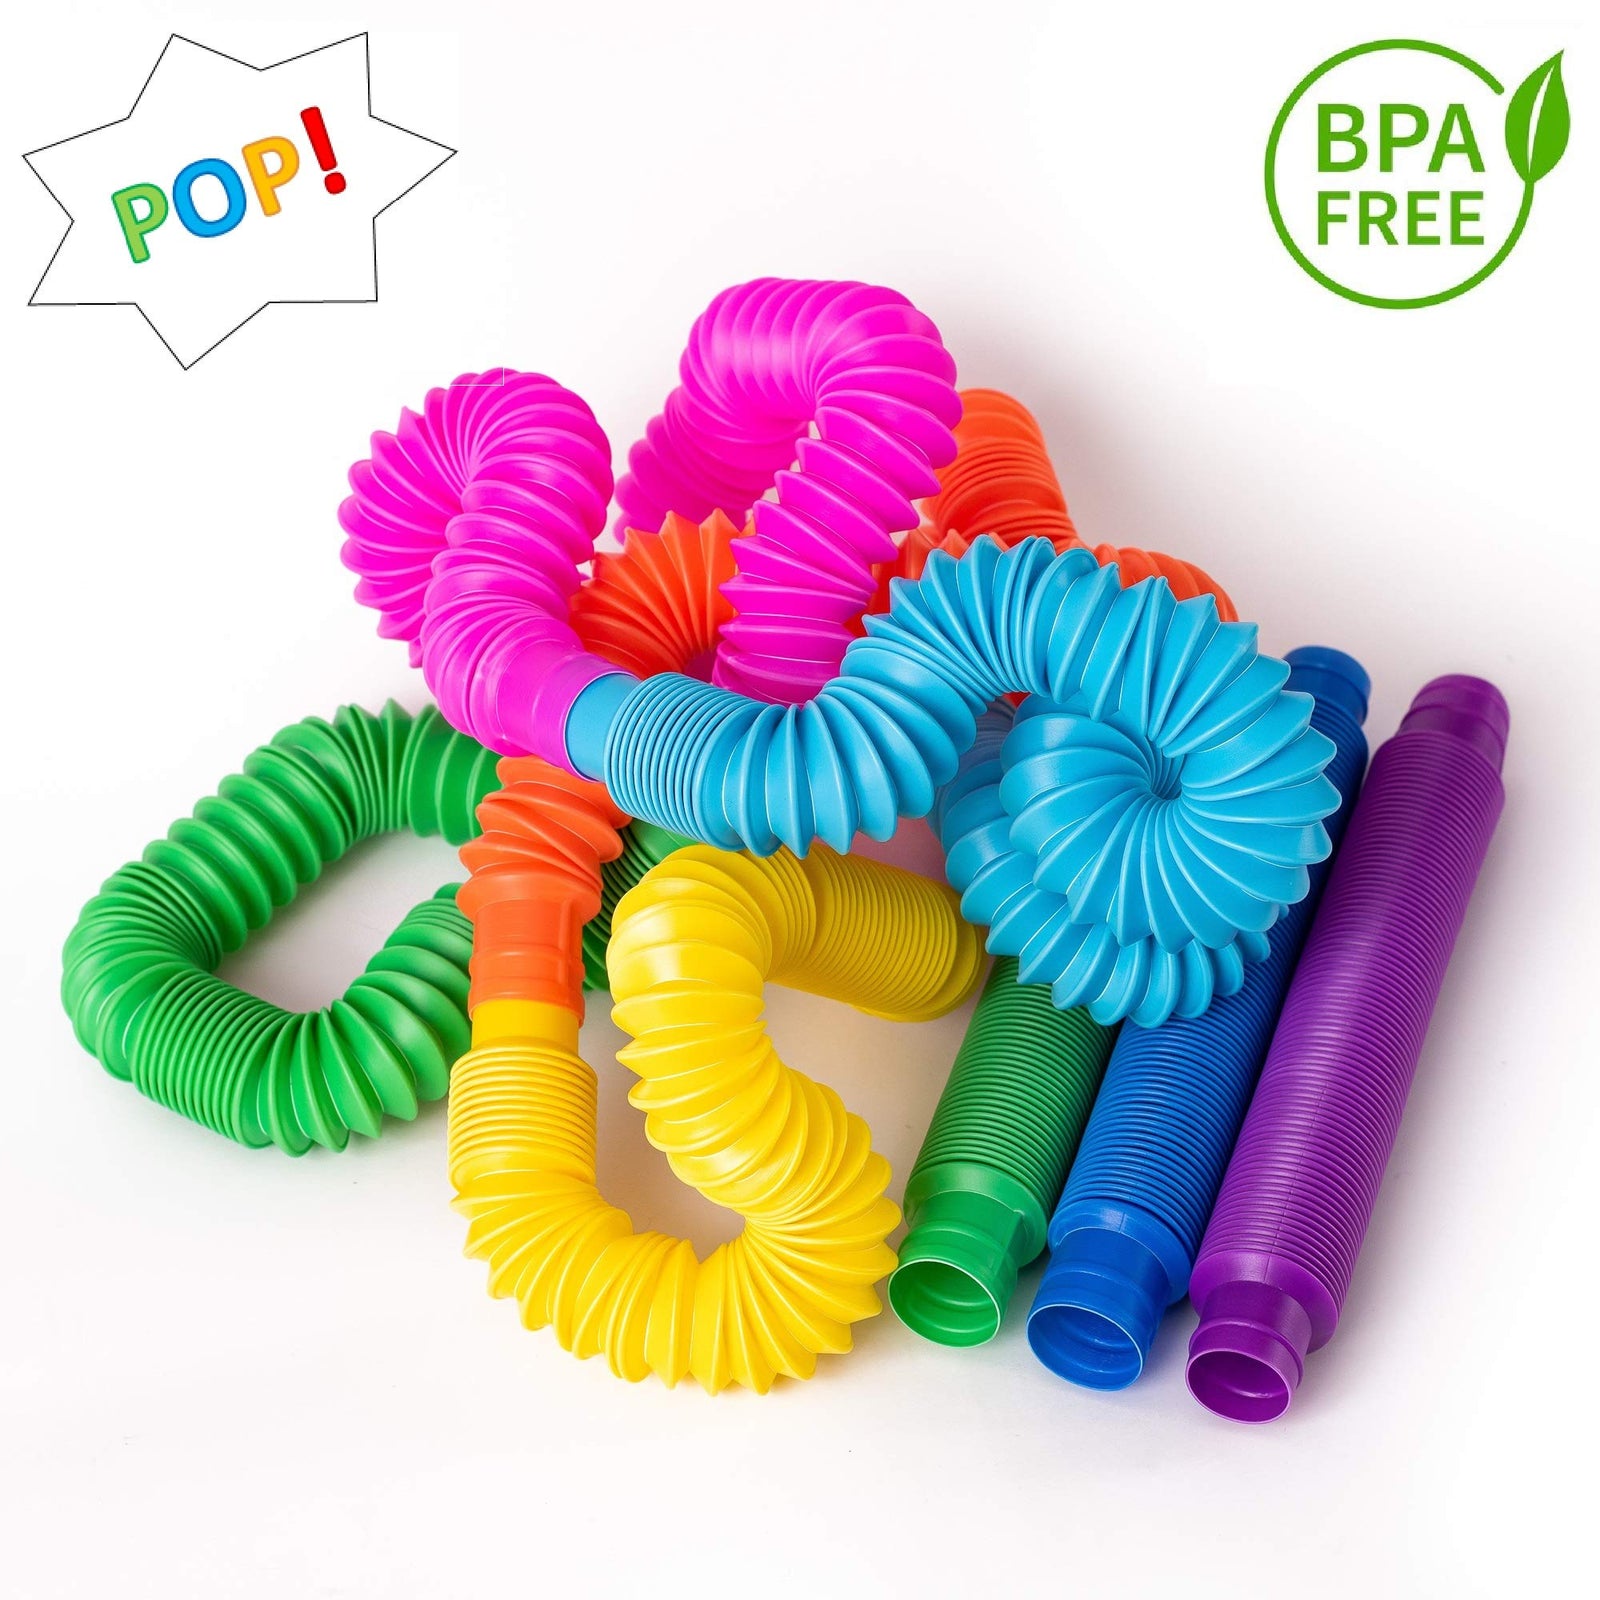 nutty toys 8 pk Pop Tube Sensory Toys - Fine Motor Skills & Learning for Toddlers, Top ADHD Fidget 2021, Unique Kids & Adults Christmas Stocking Stuffer Gift Idea, Best Tween Boy & Girl Present